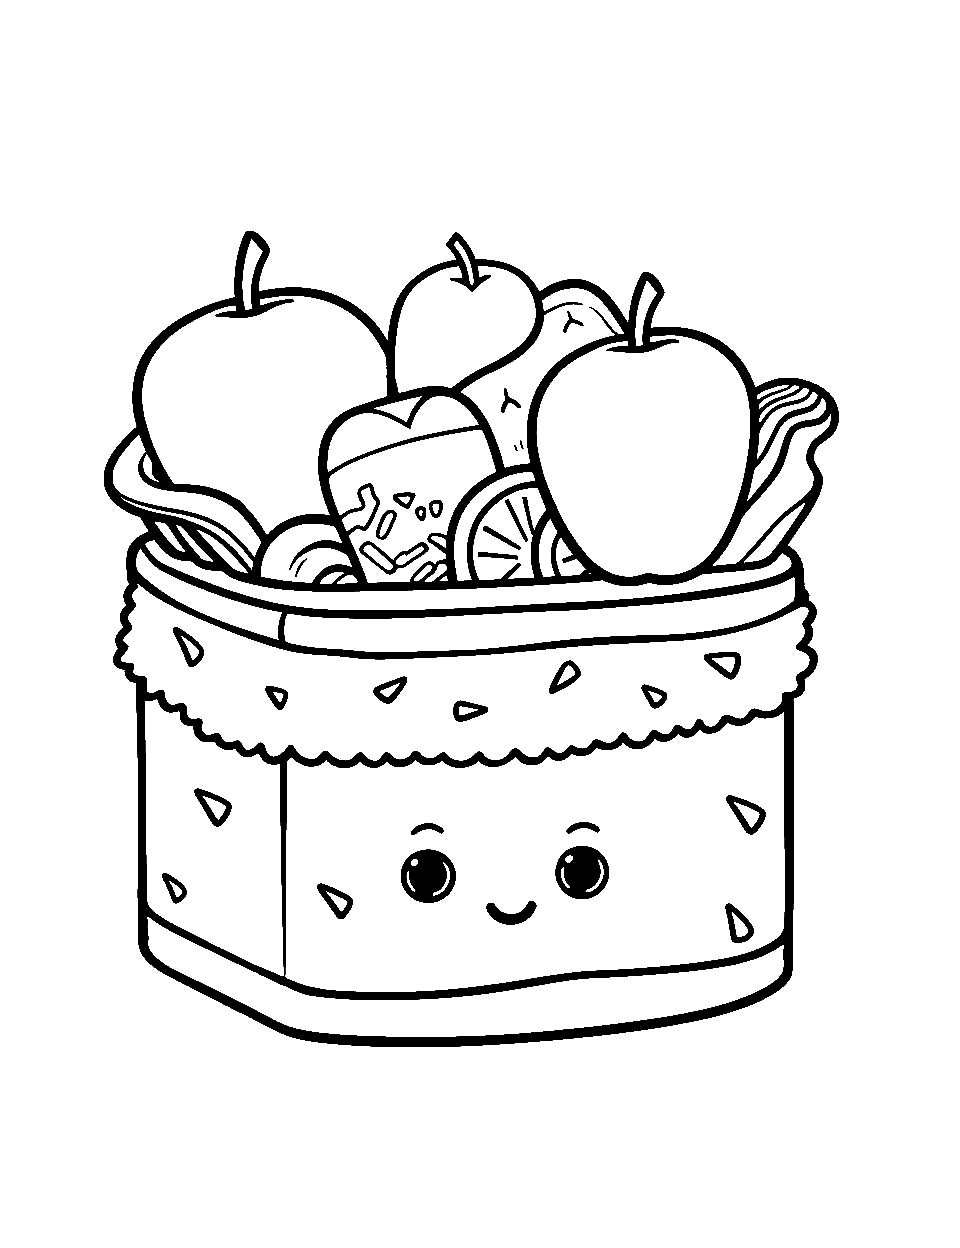 Cute Lunchbox Surprise Food Coloring Page - A cute-looking open lunchbox with a bunch of food inside.